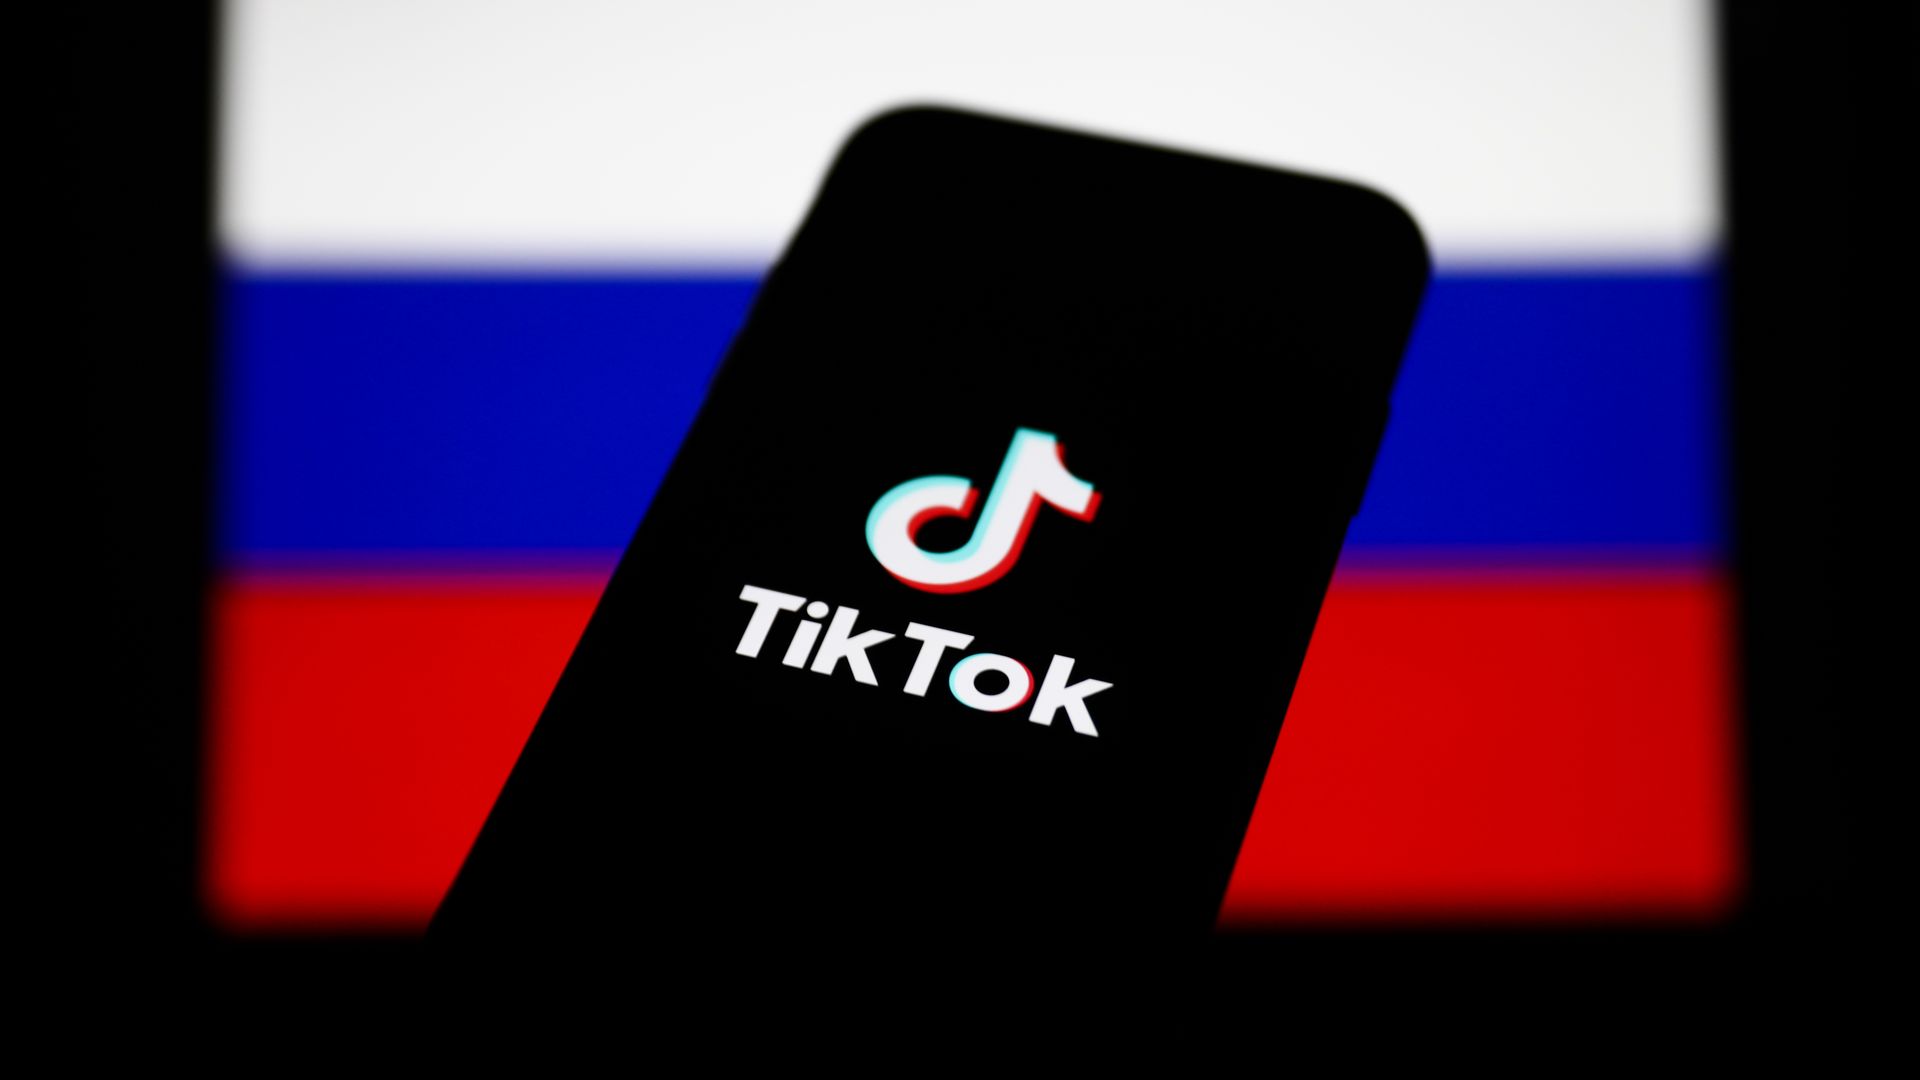 a photo of tik tok logo on a phone in front of russia flag